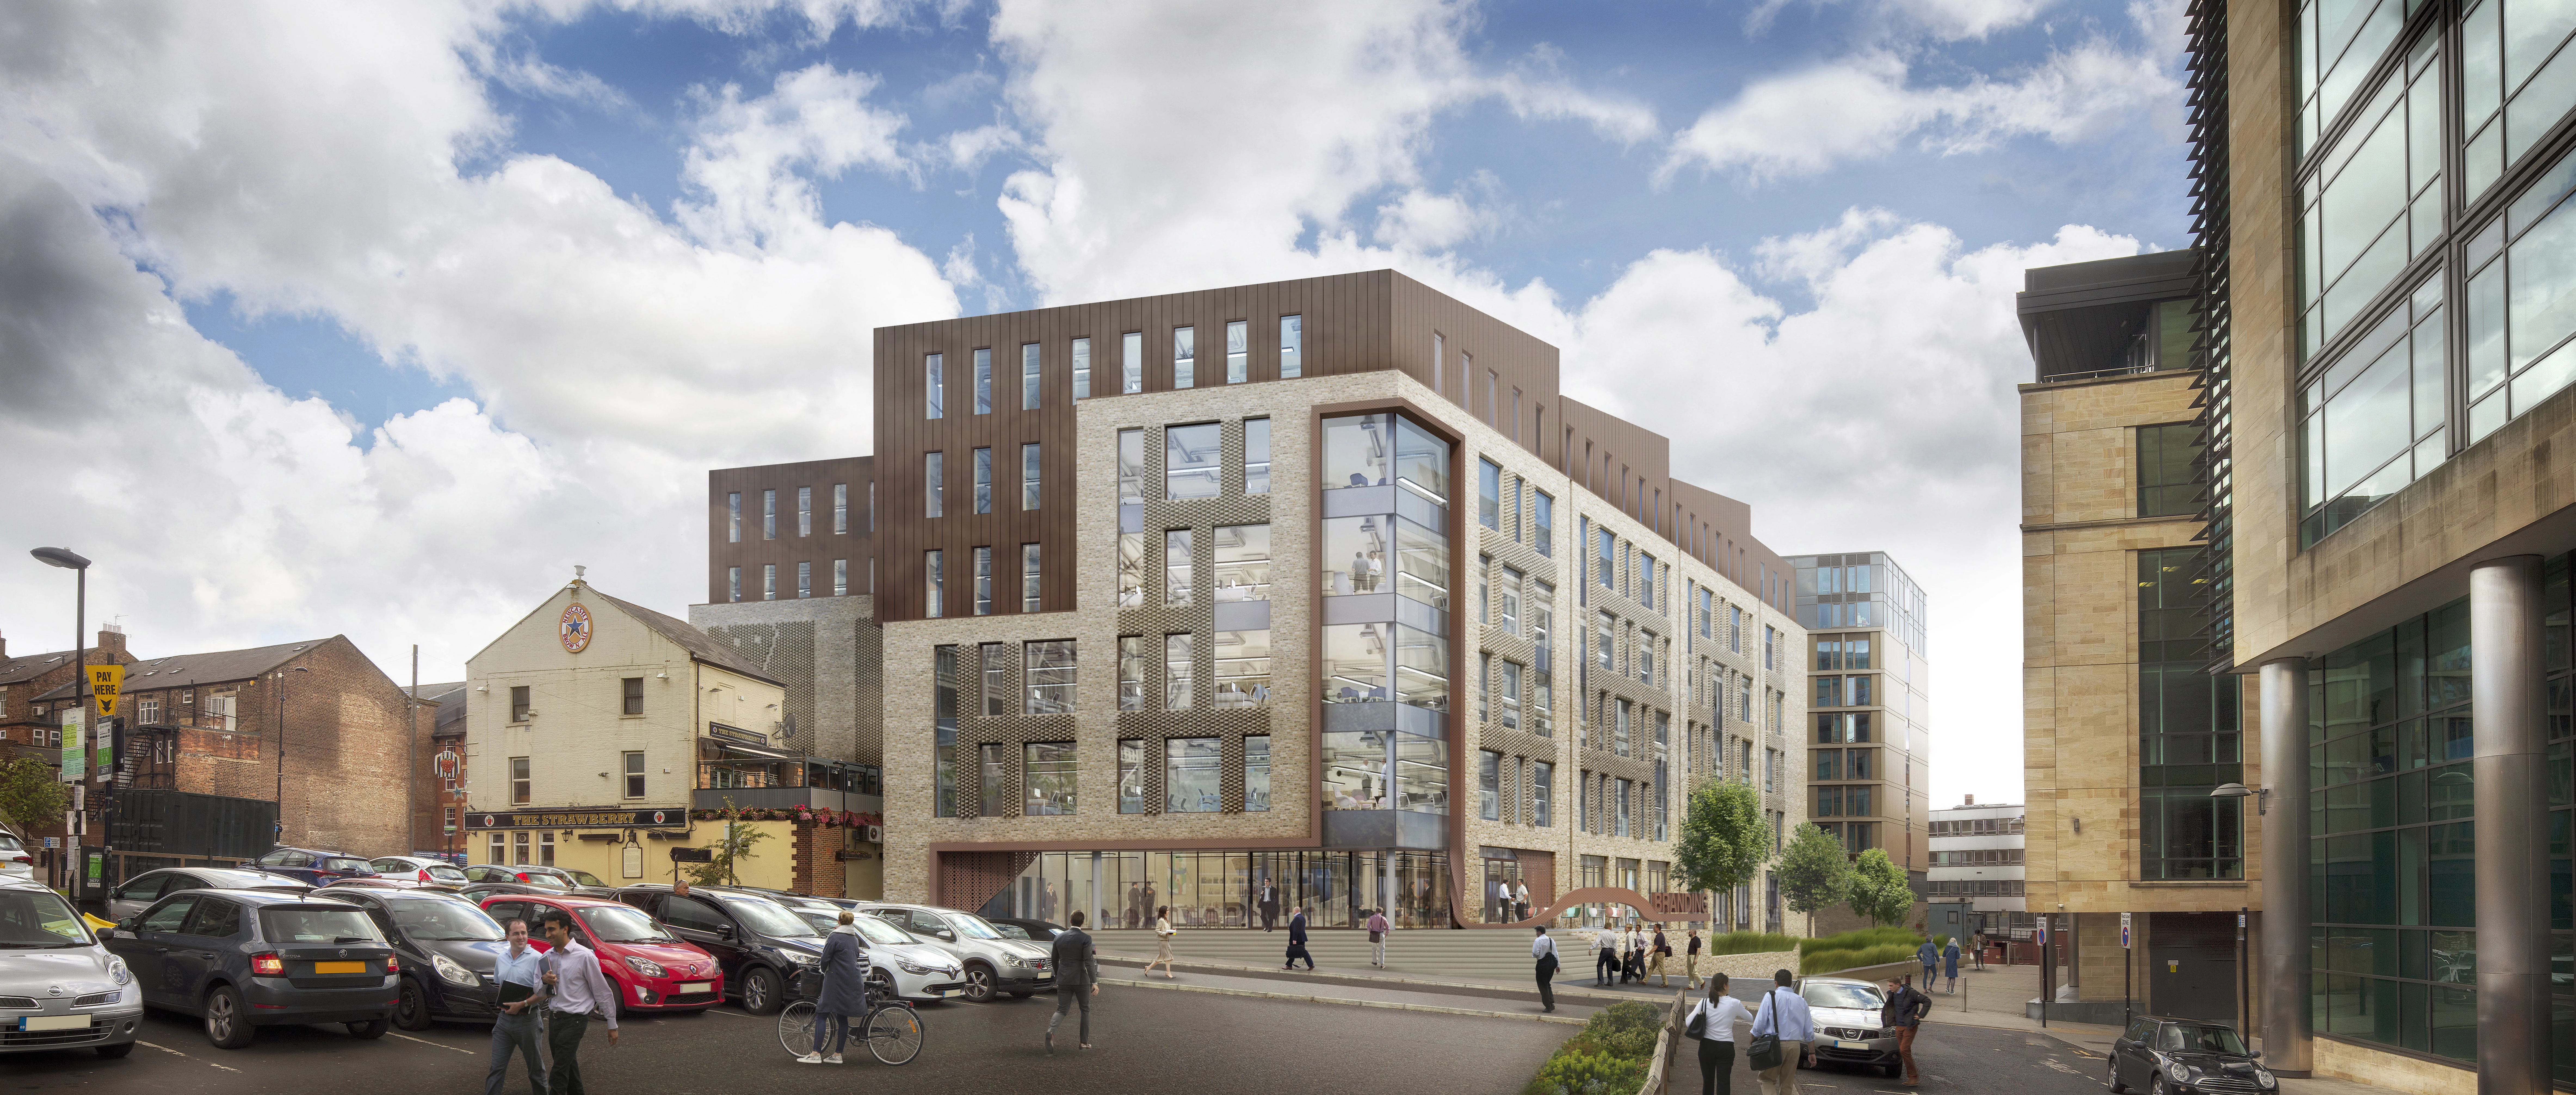 Home Group's new office is to be built on One Strawberry Lane, next to St James Park.